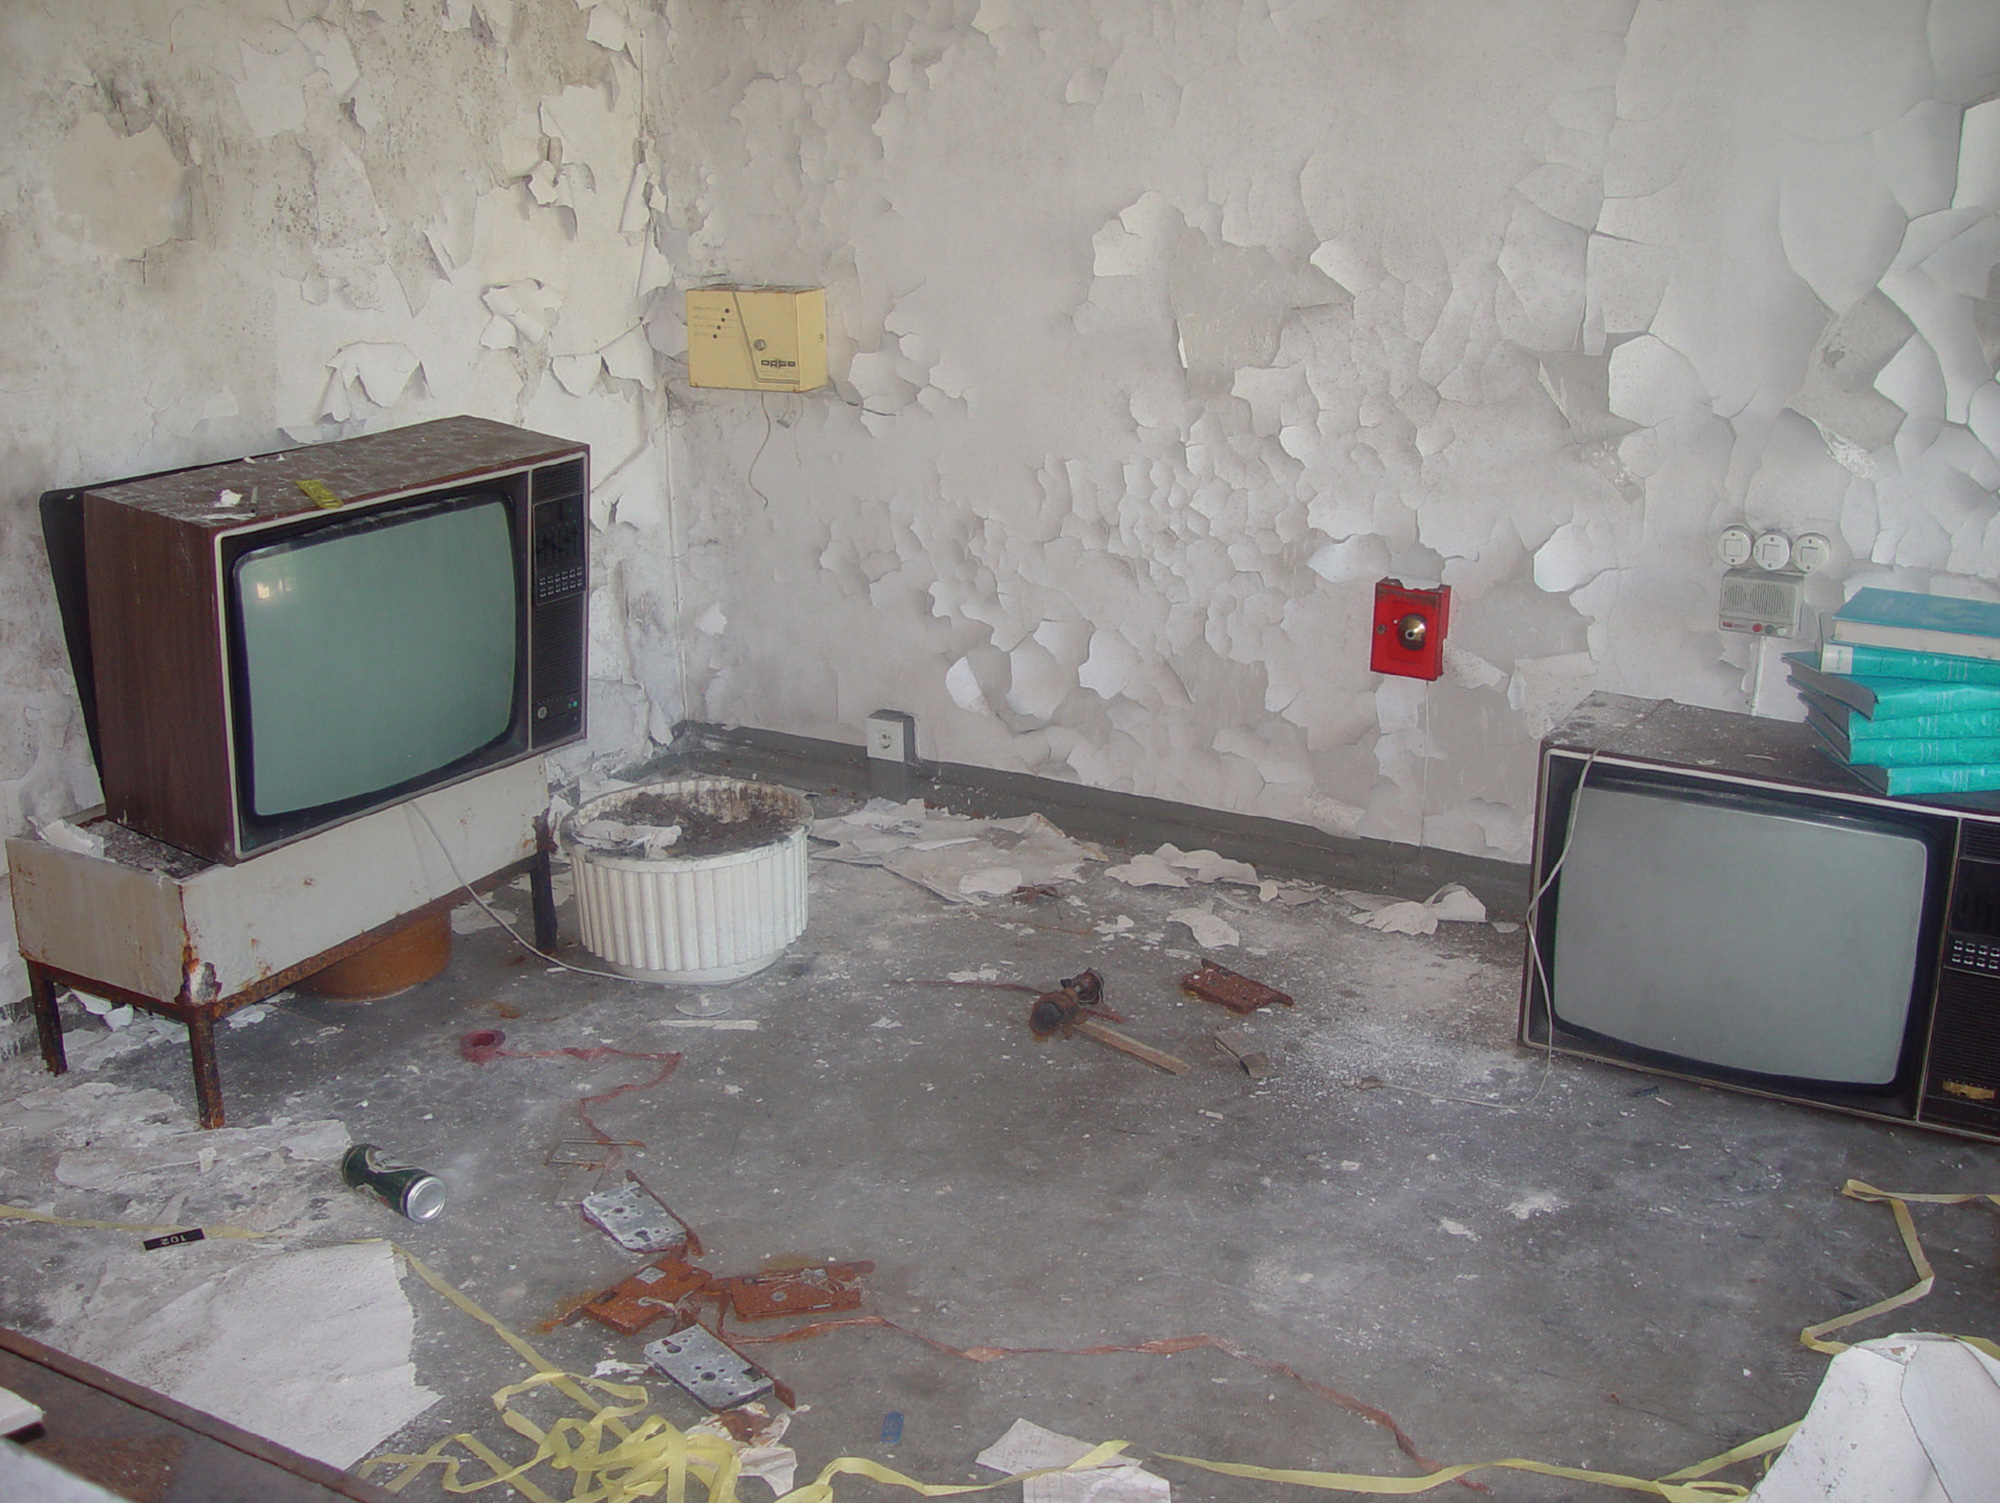 A photograph of paint peeling off the walls in a room where a small television sits on the ground.